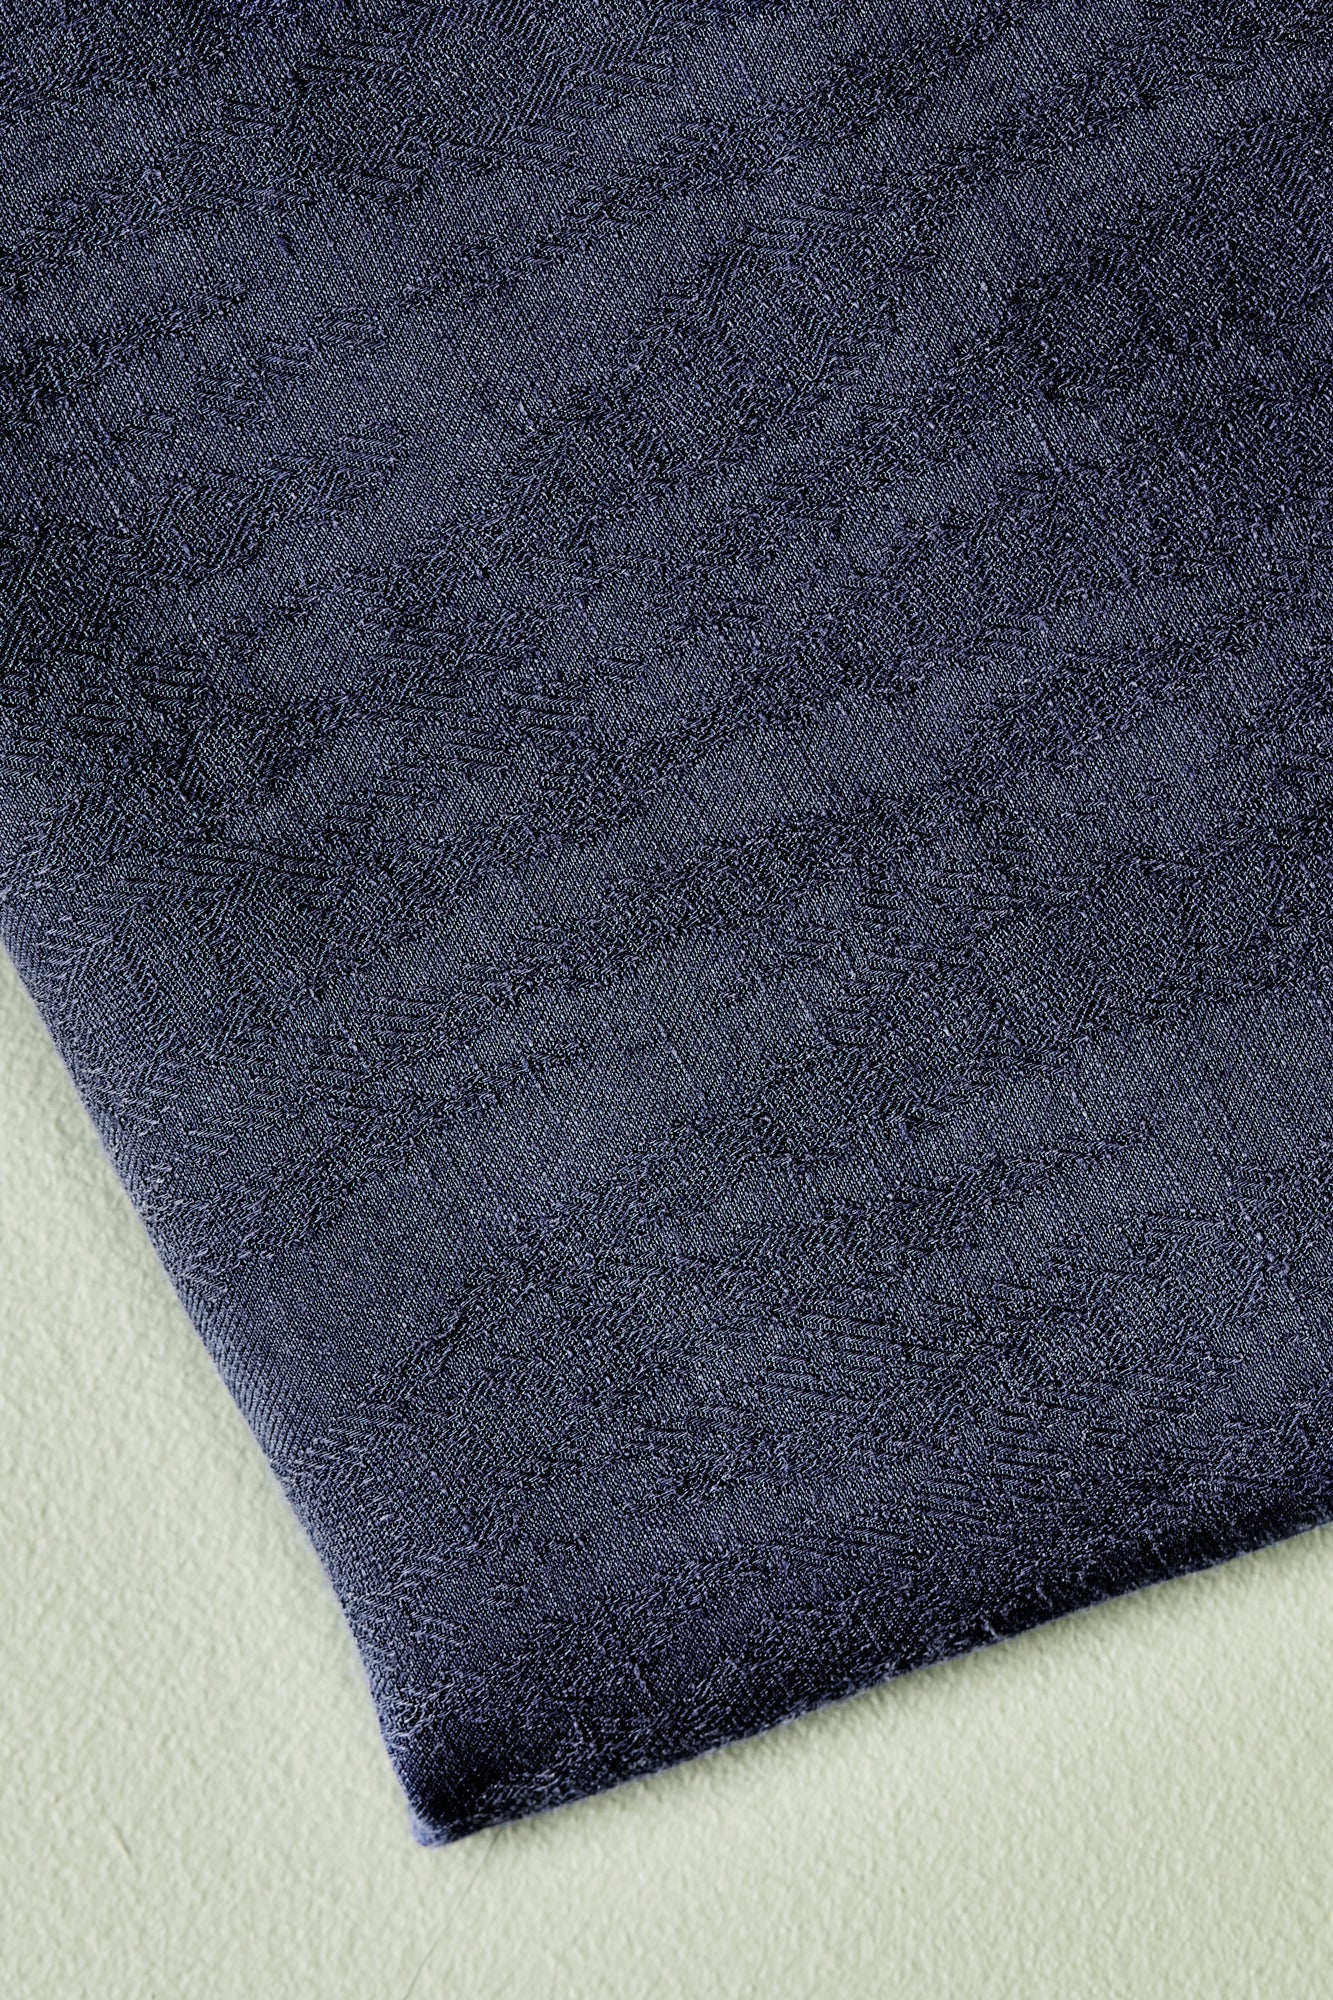 Close up of navy linen and tencel blend sewing fabric